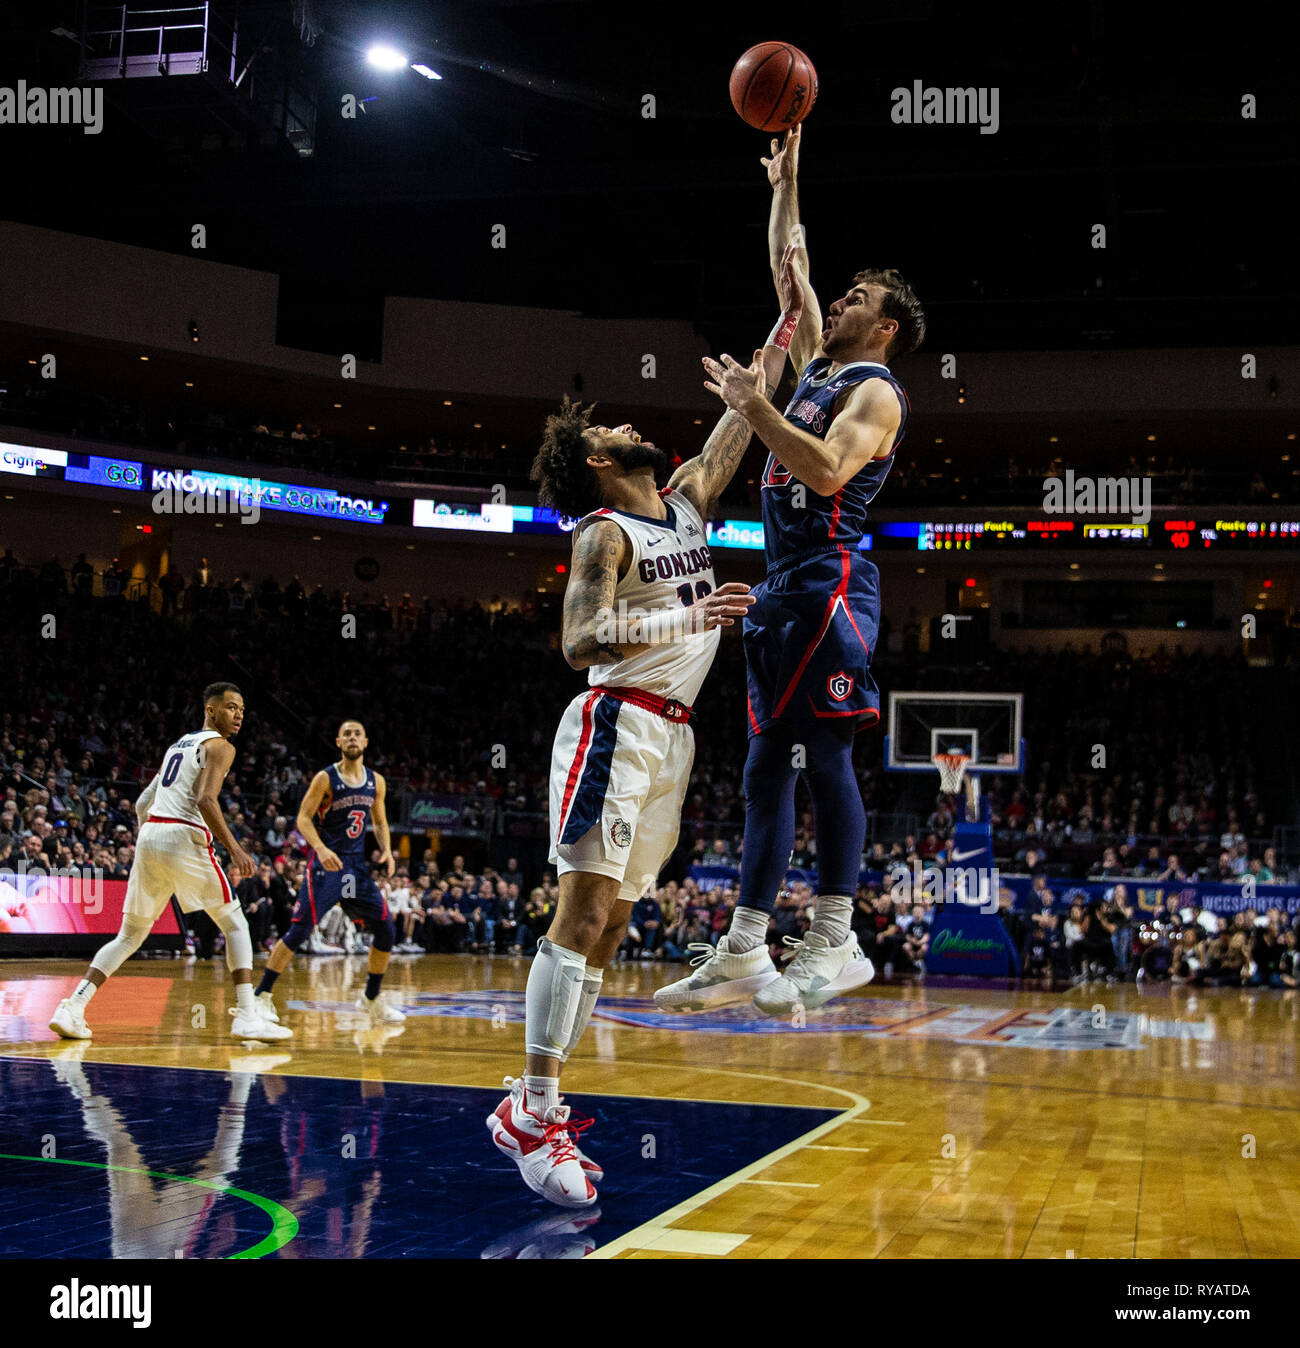 Mar 12 2019 Las Vegas, NV, U.S.A. St. Mary's guard Tommy Kuhse (12) drives to the basket during the NCAA West Coast Conference Men's Basketball Tournament championship between the Gonzaga Bulldogs and the Saint Mary's Gaels 60-47 win at Orleans Arena Las Vegas, NV. Thurman James/CSM Stock Photo